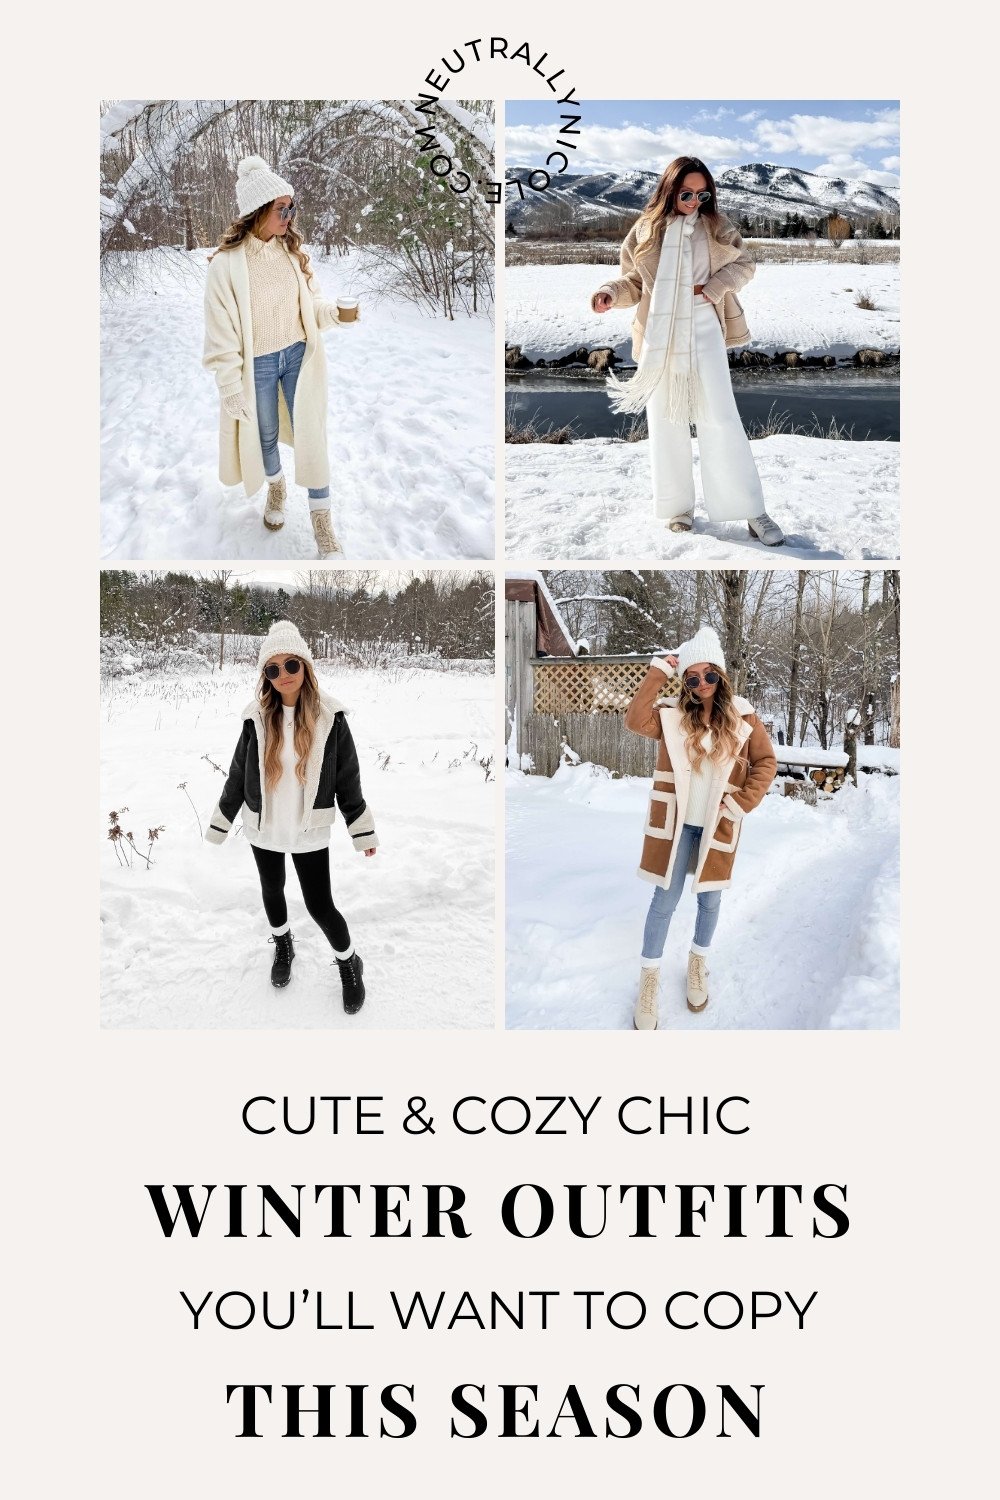 Cute Winter Outfit Ideas To Nail That Cozy Chic Look This Season